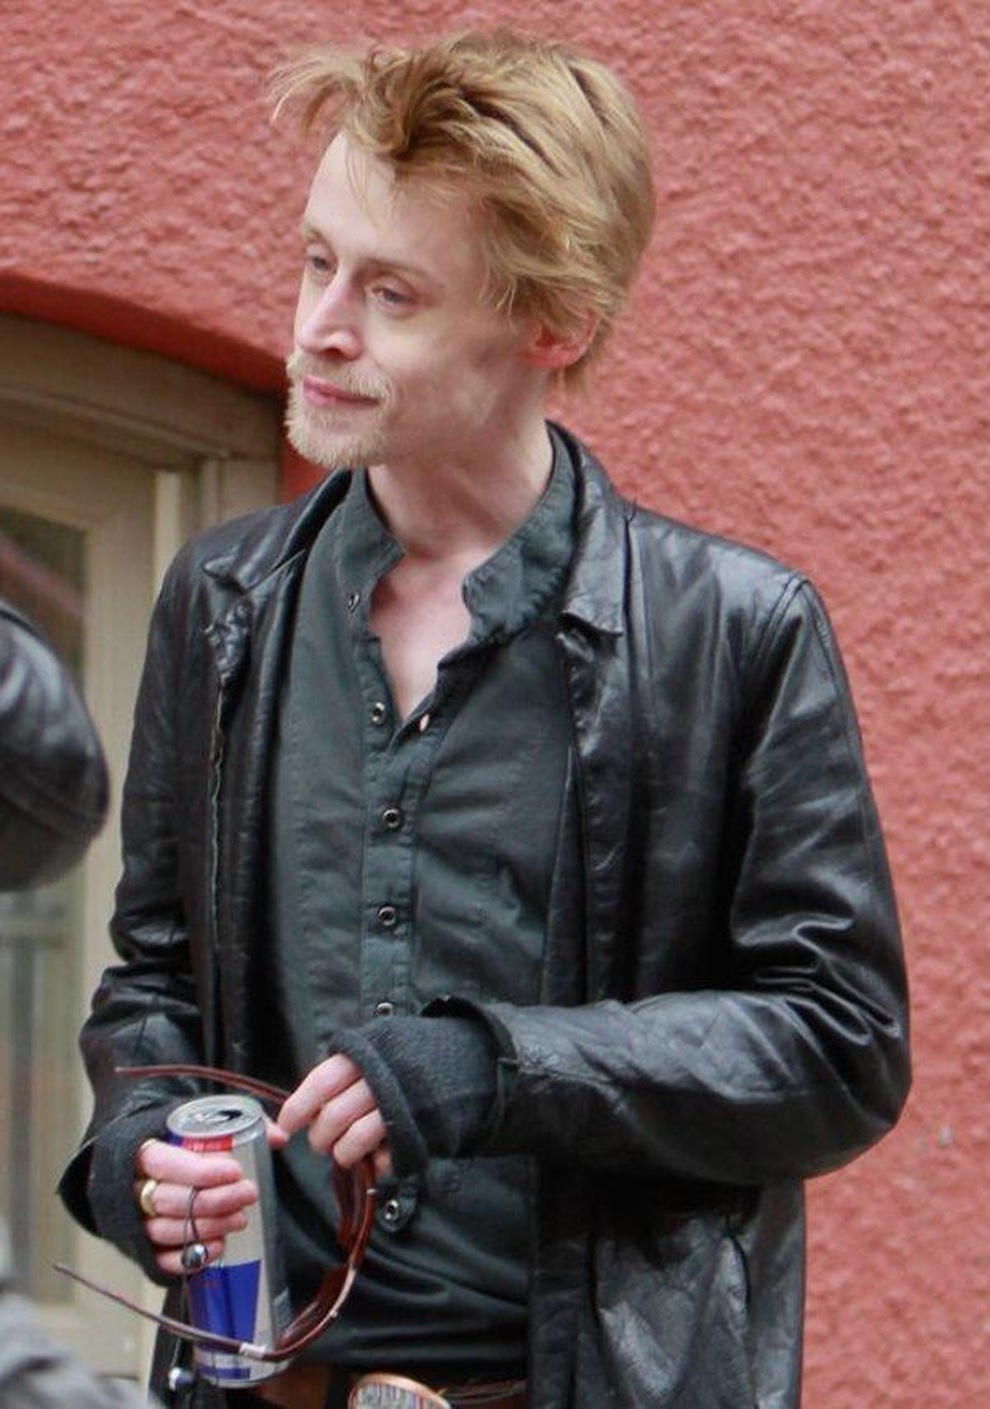 Macaulay Culkin appears healthy and dashing in new movie - 2